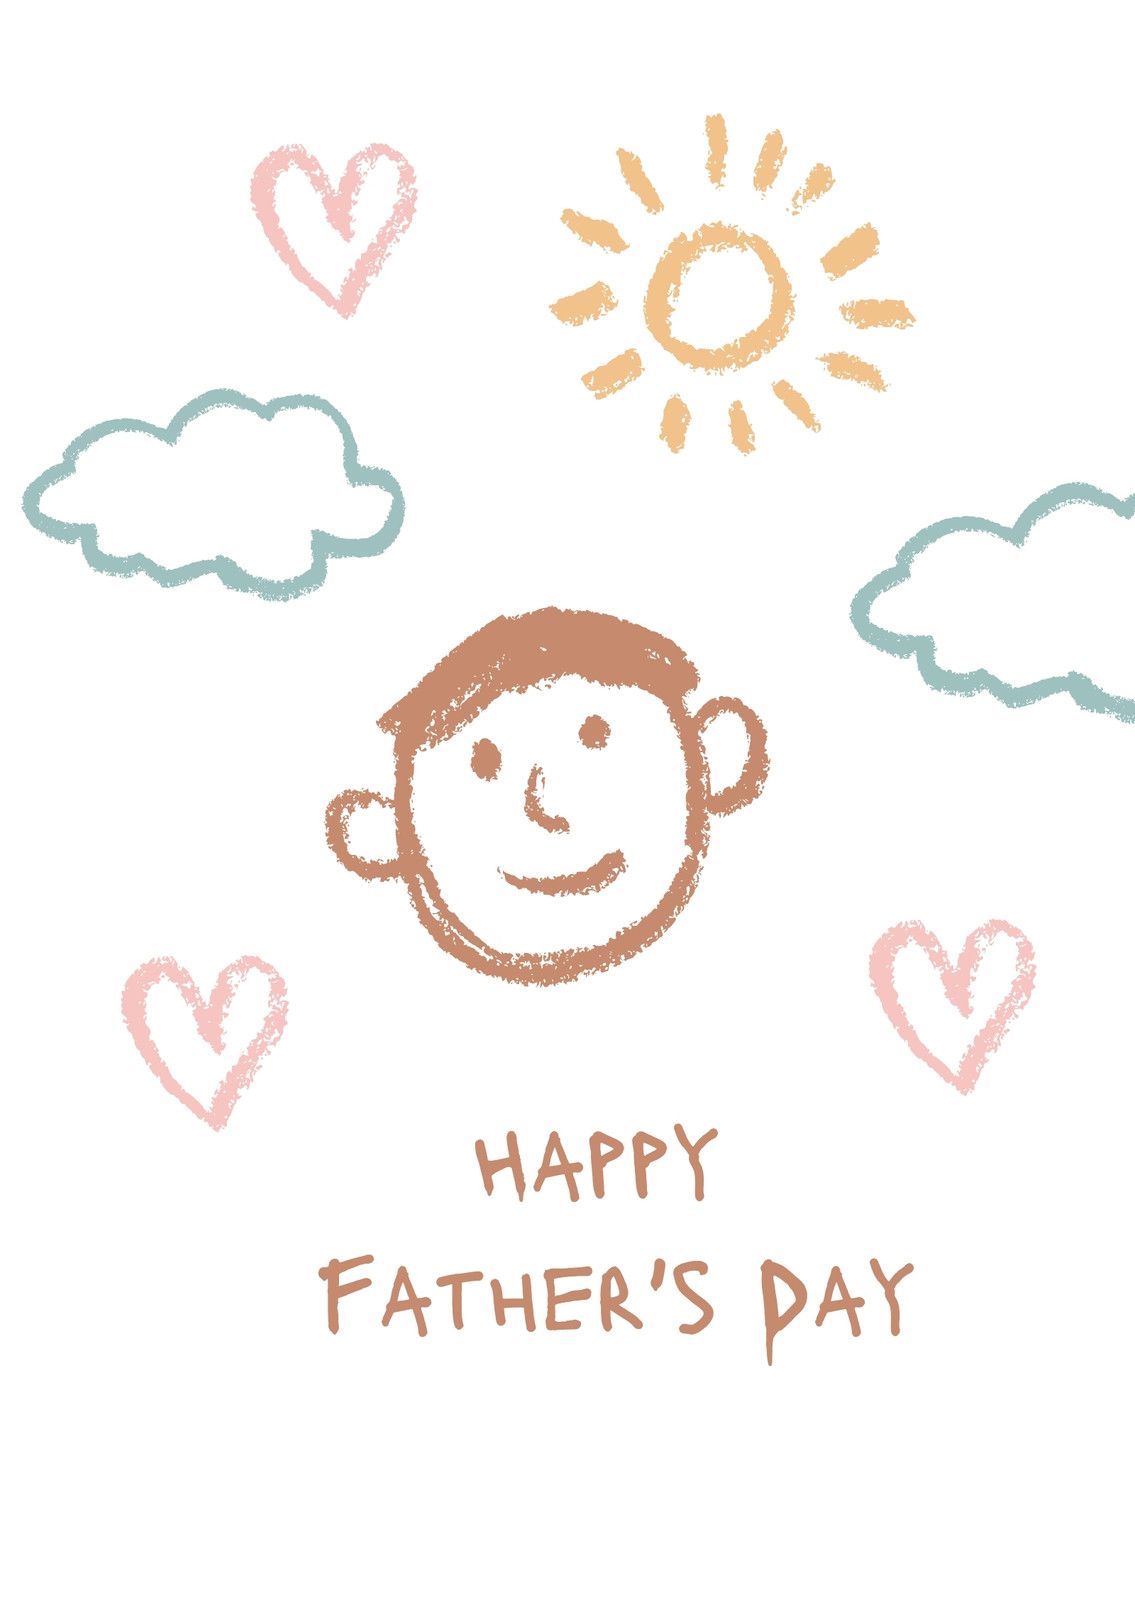 Free, printable Father's Day card templates to personalize | Canva